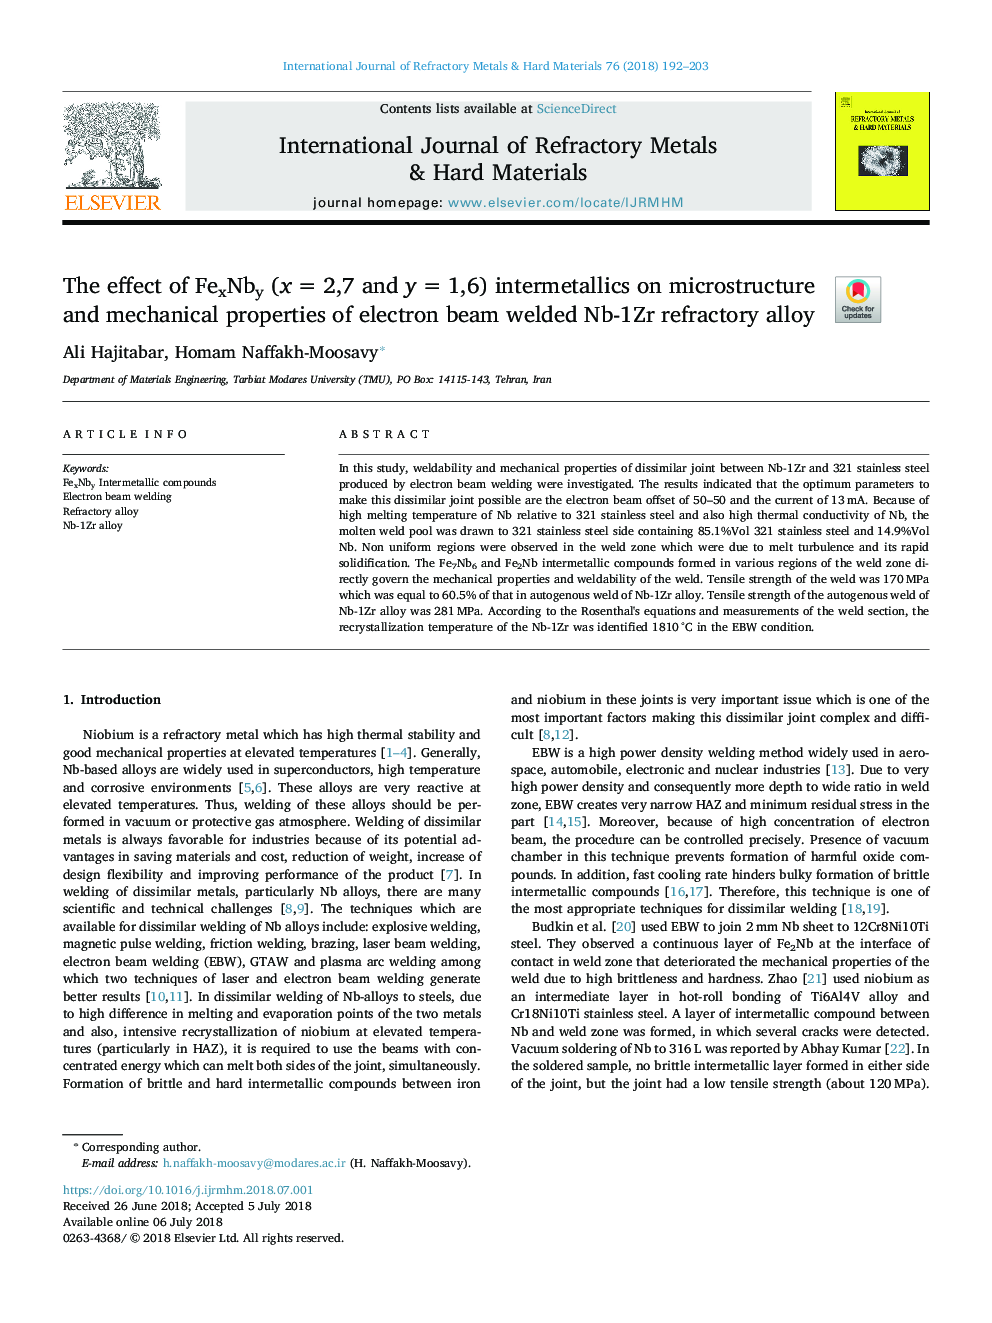 The effect of FexNby (xâ¯=â¯2,7 and yâ¯=â¯1,6) intermetallics on microstructure and mechanical properties of electron beam welded Nb-1Zr refractory alloy